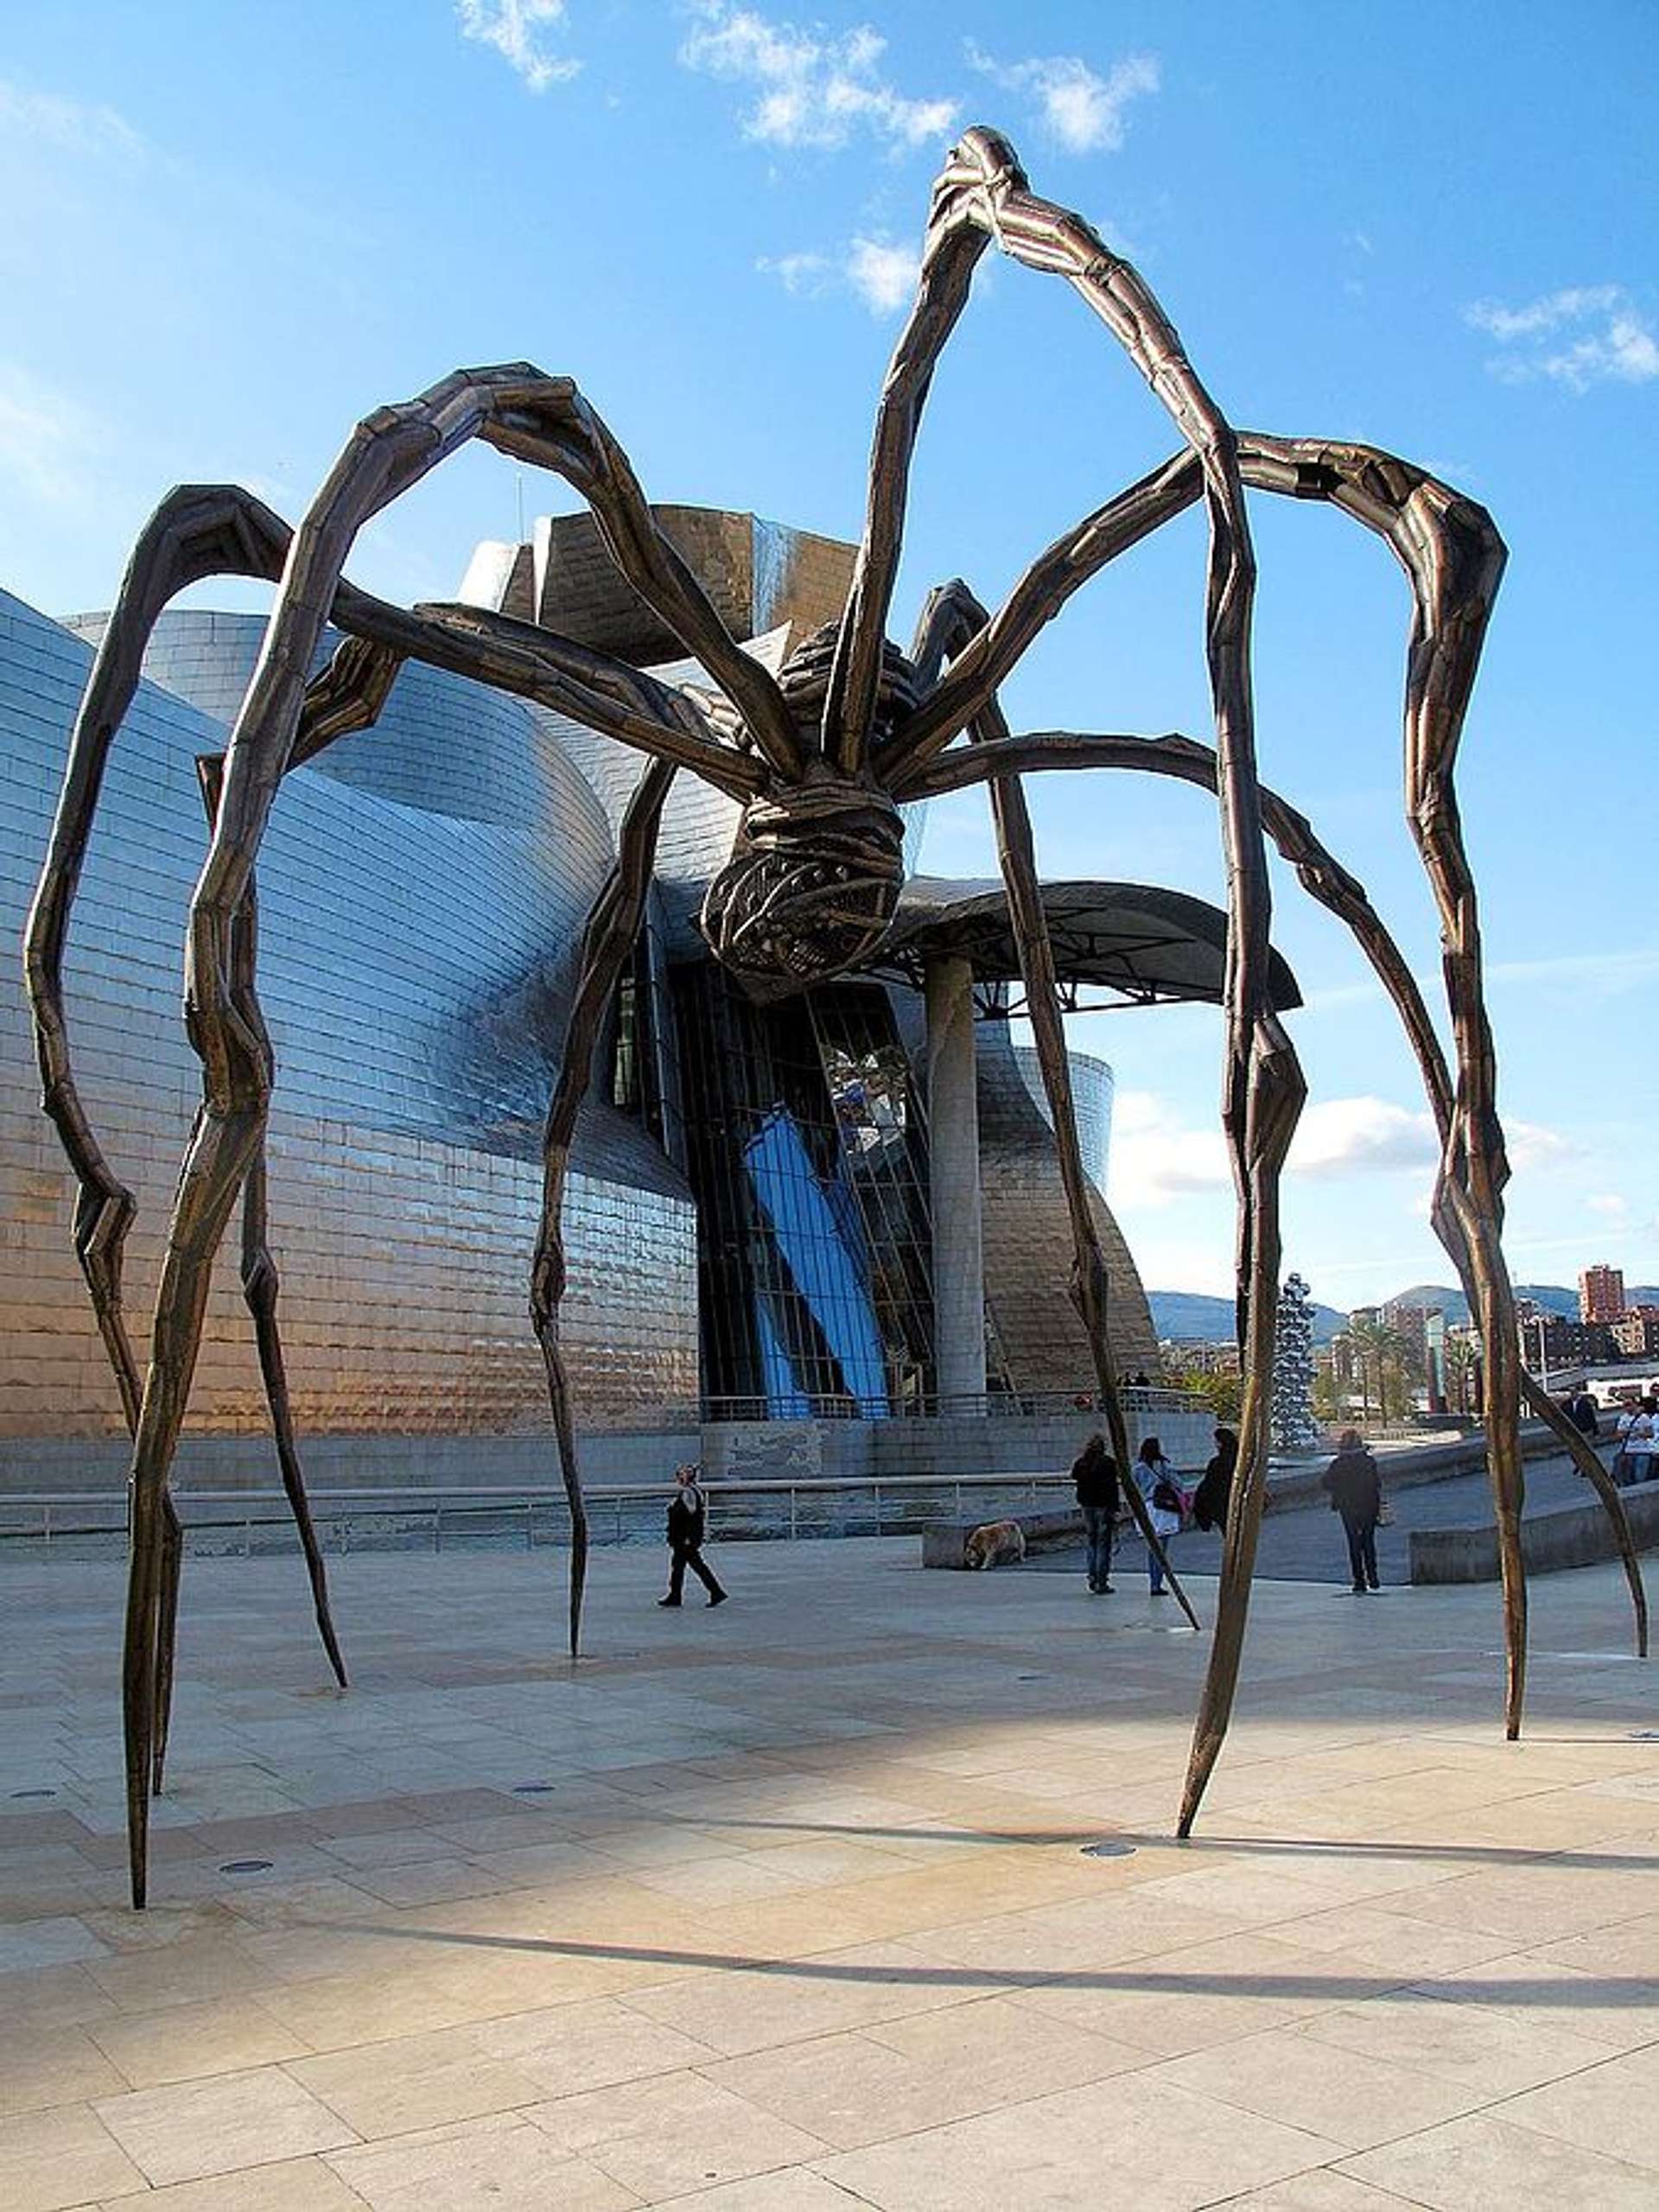 Louise Bourgeois: The Woman Behind The Spider Sculptures, MyArtBroker